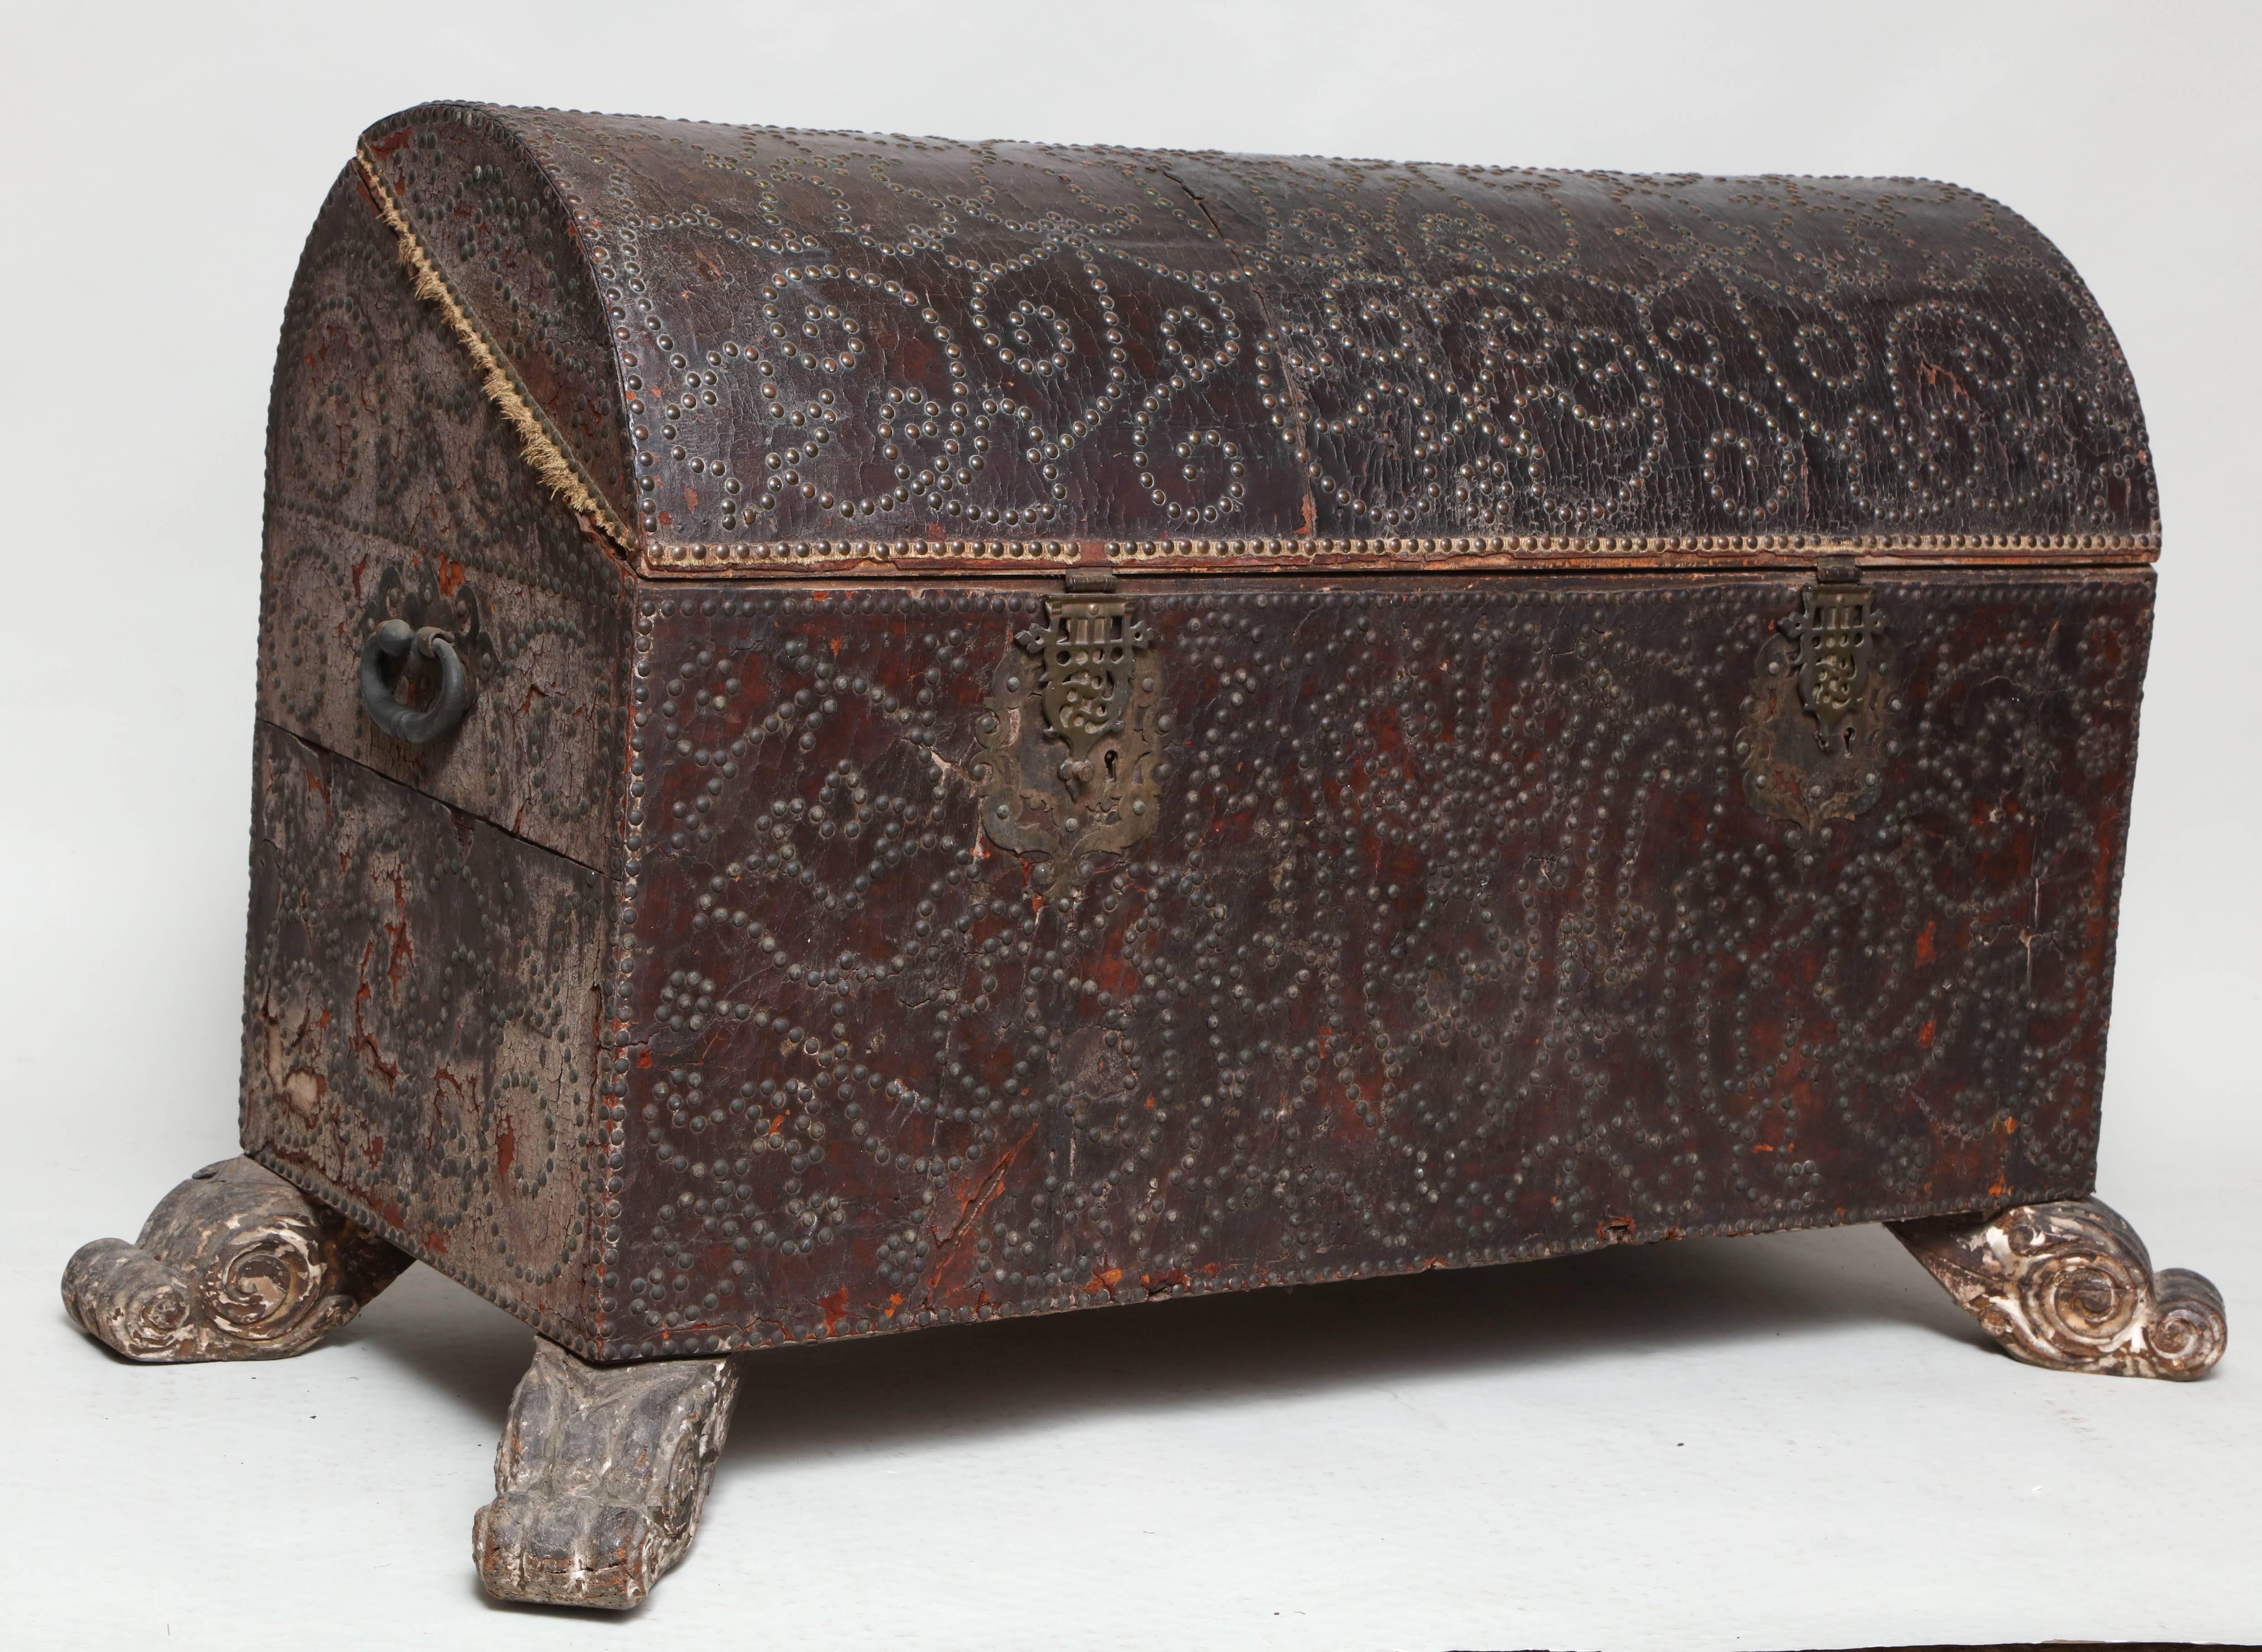 Very good Spanish 18th century studded leather chest, the domed lit with Arabesque design stud work, the front with two pierced brass clasps and escutcheons with original iron locks, the front also with Arabesque stud work, standing on original paw